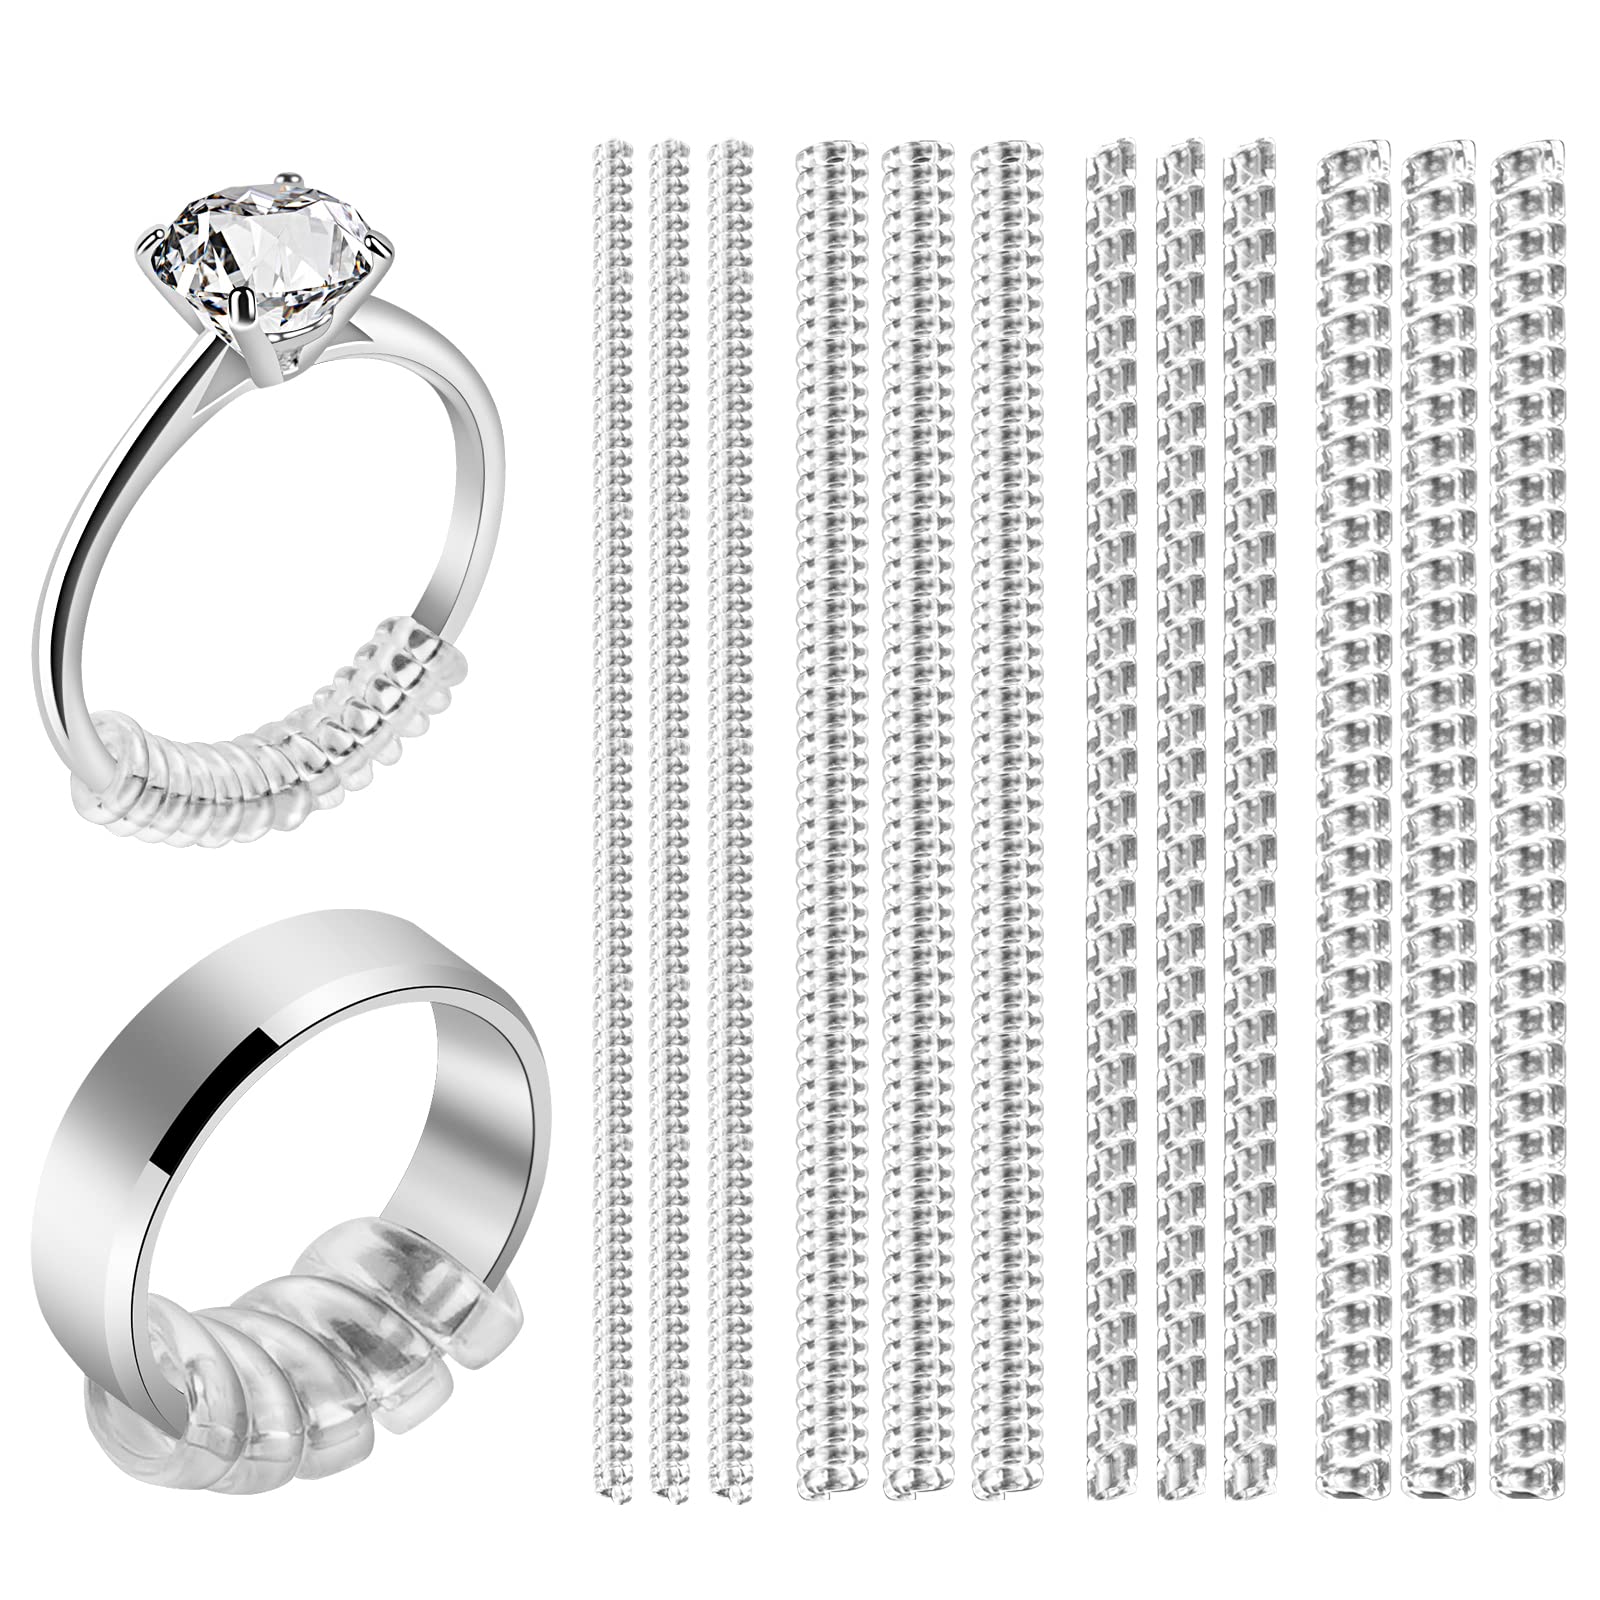 110 Pcs Ring Sizer Adjuster for Loose Rings with Ring Size